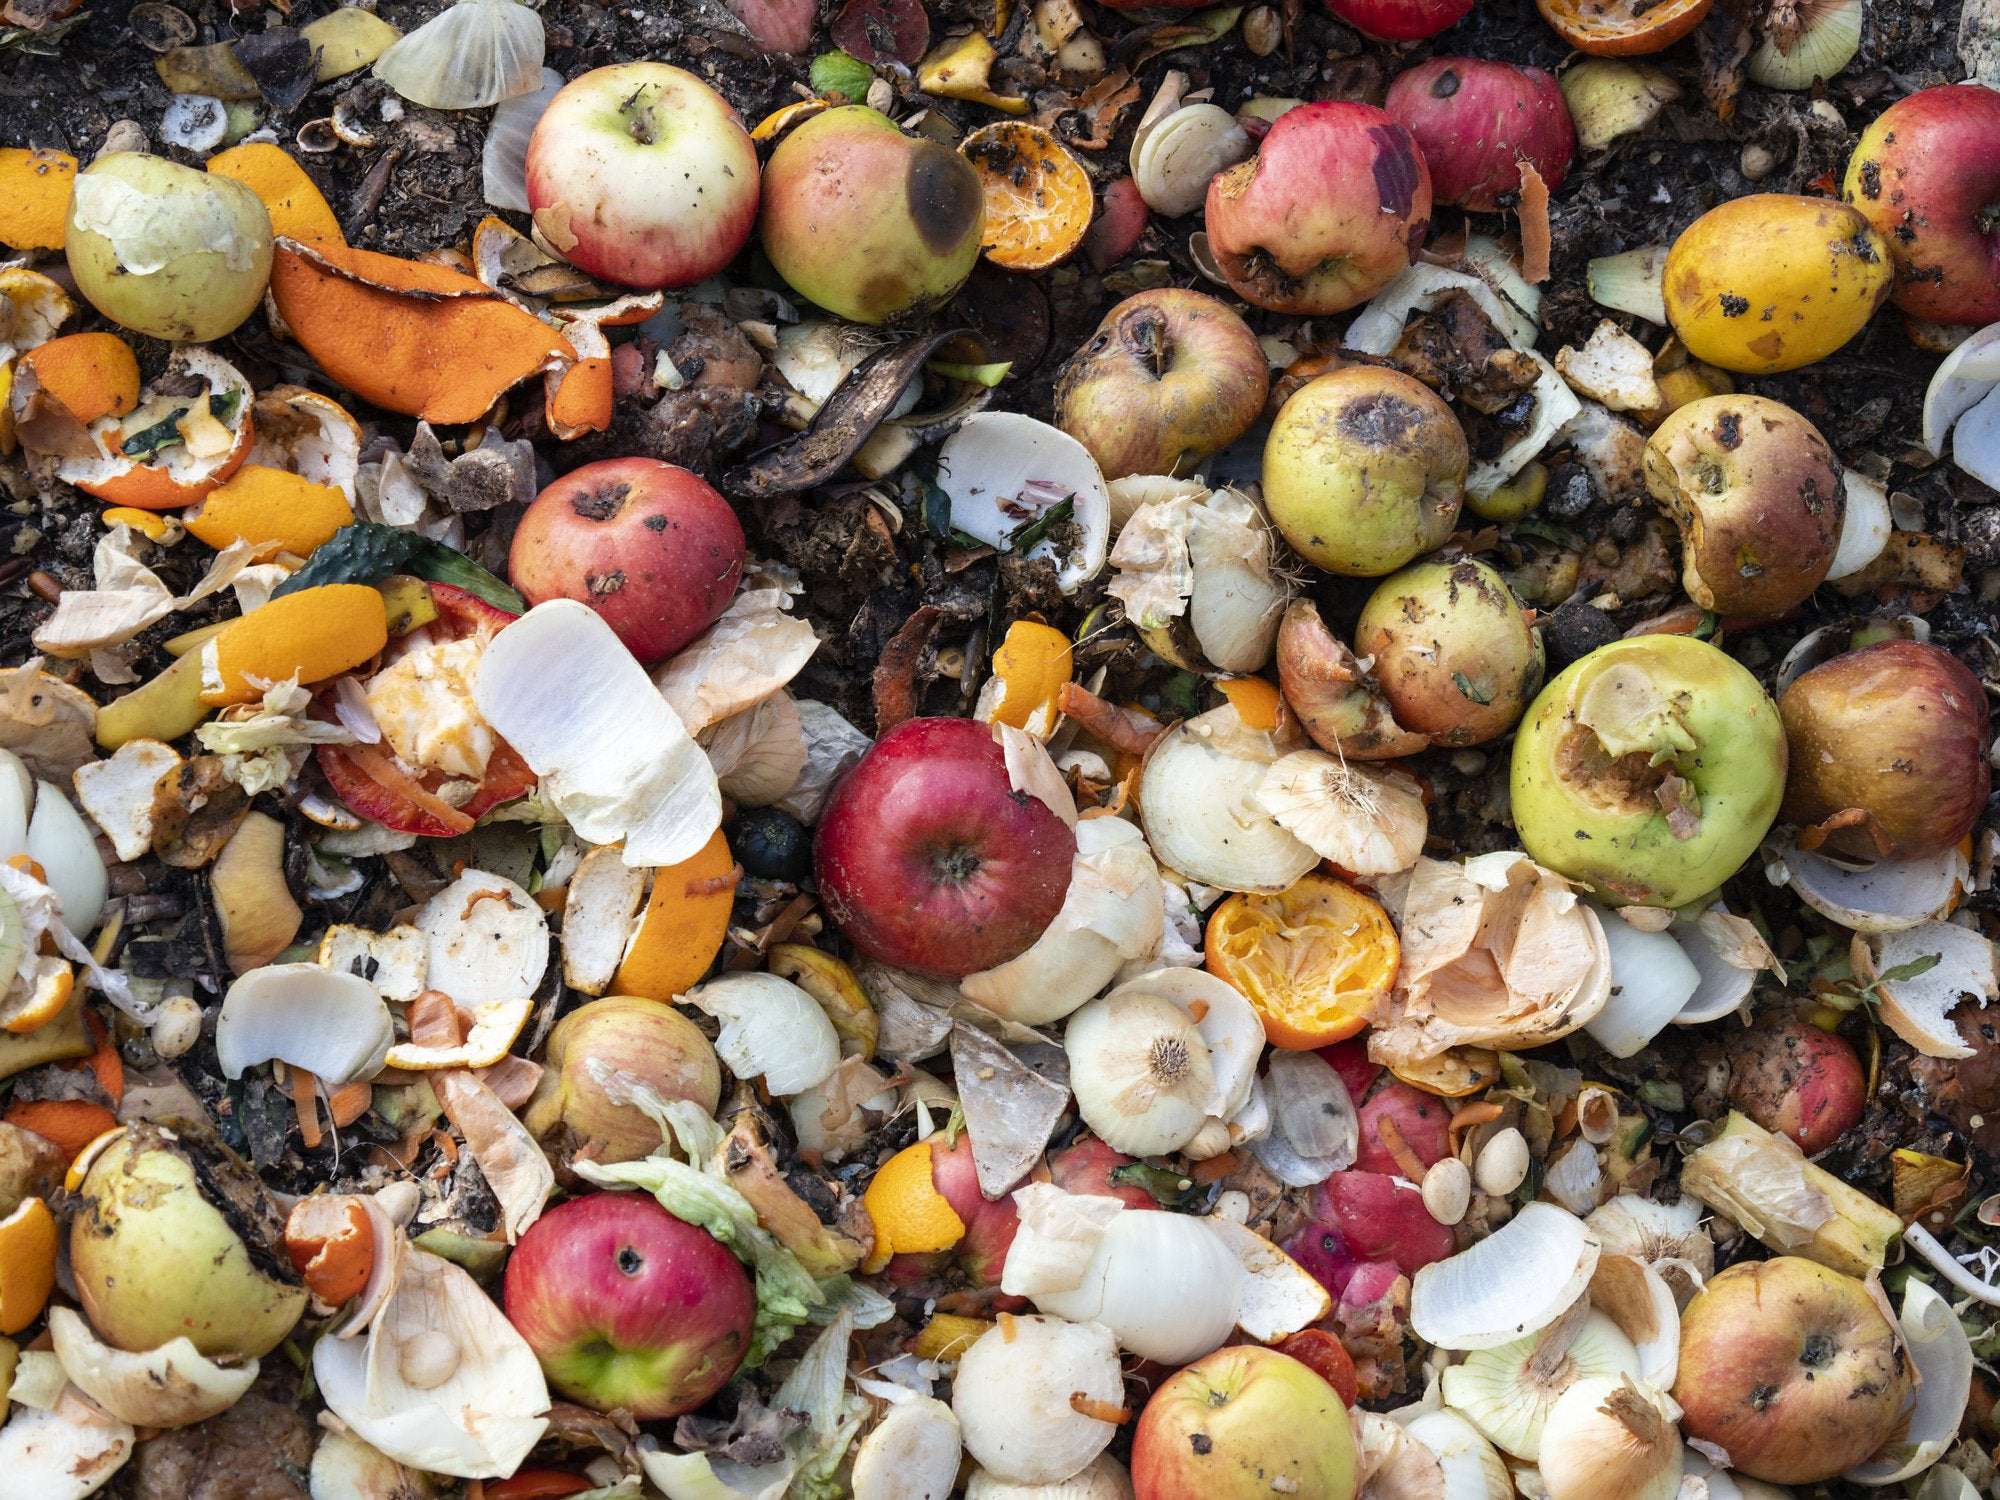 image for New York Food Waste Recycling Law Goes Into Effect